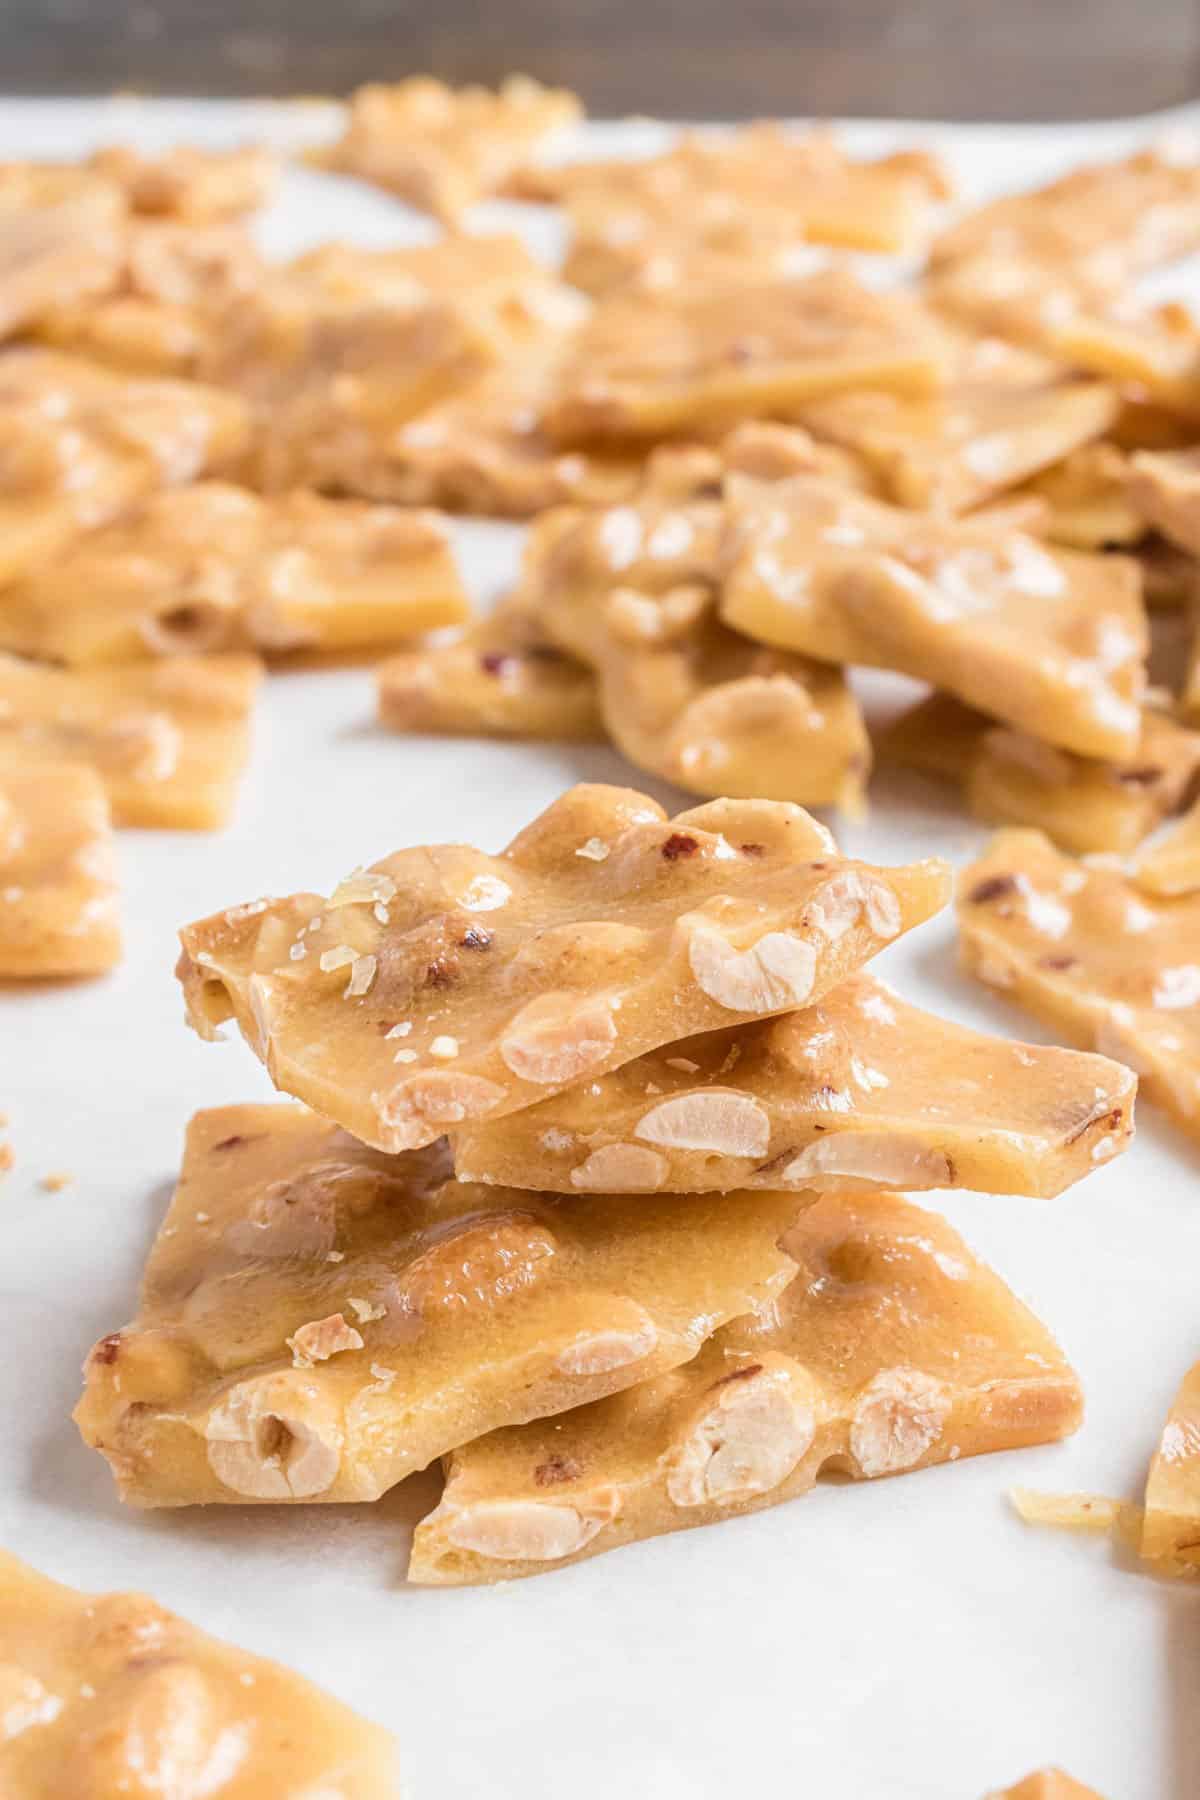 Peanut brittle stacked on top of eachother.